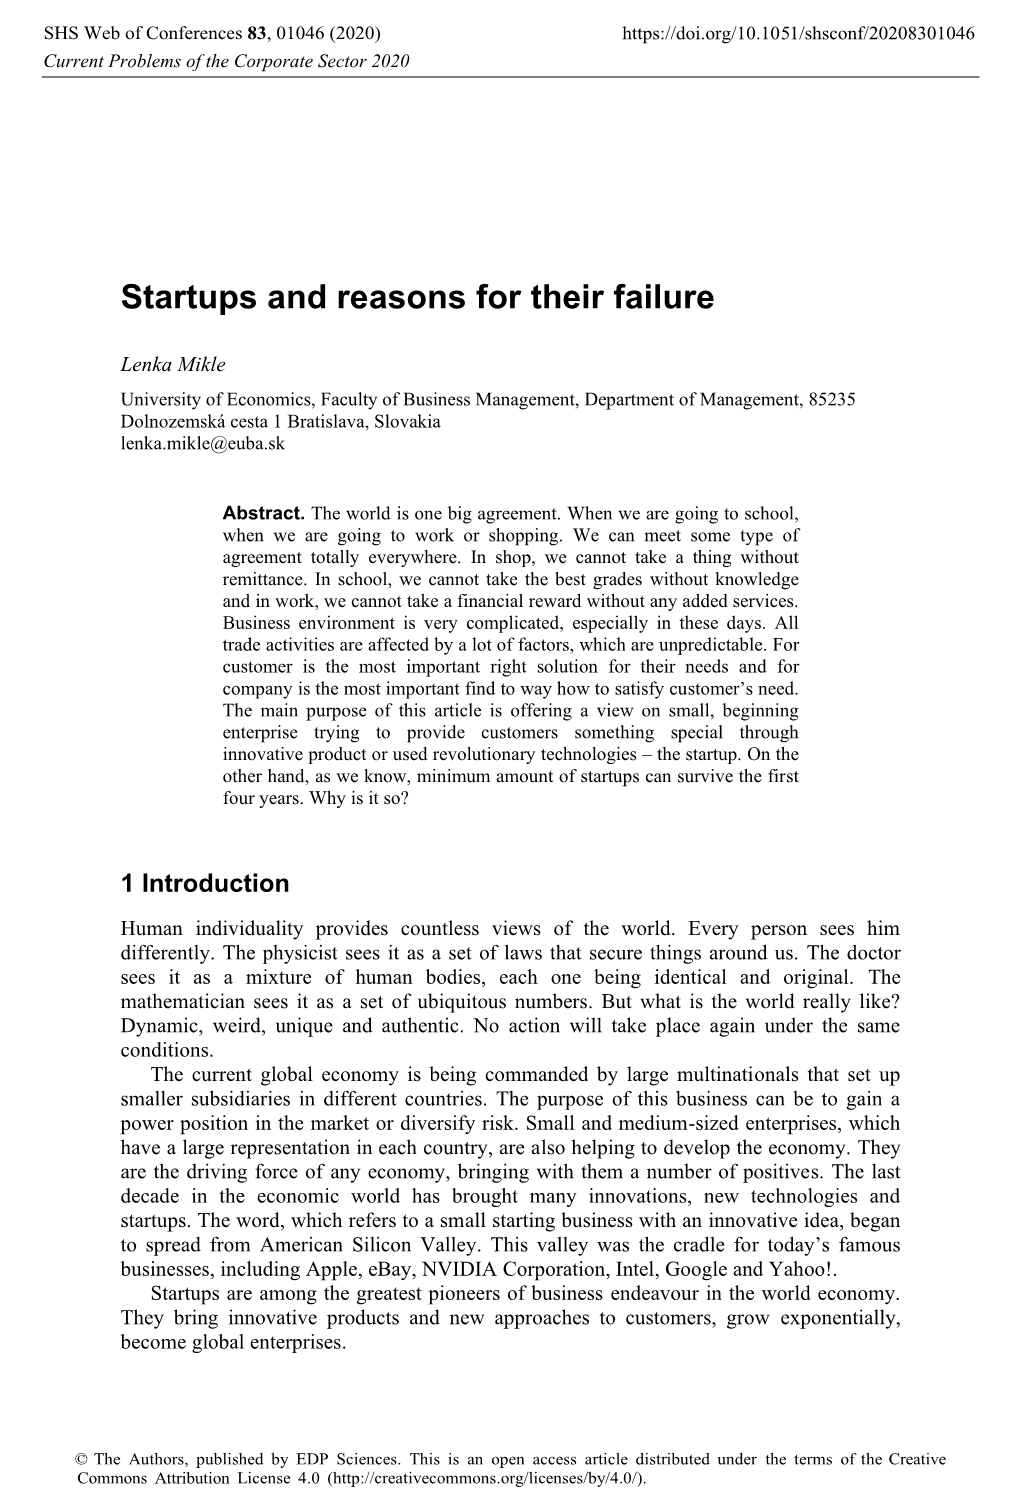 Startups and Reasons for Their Failure